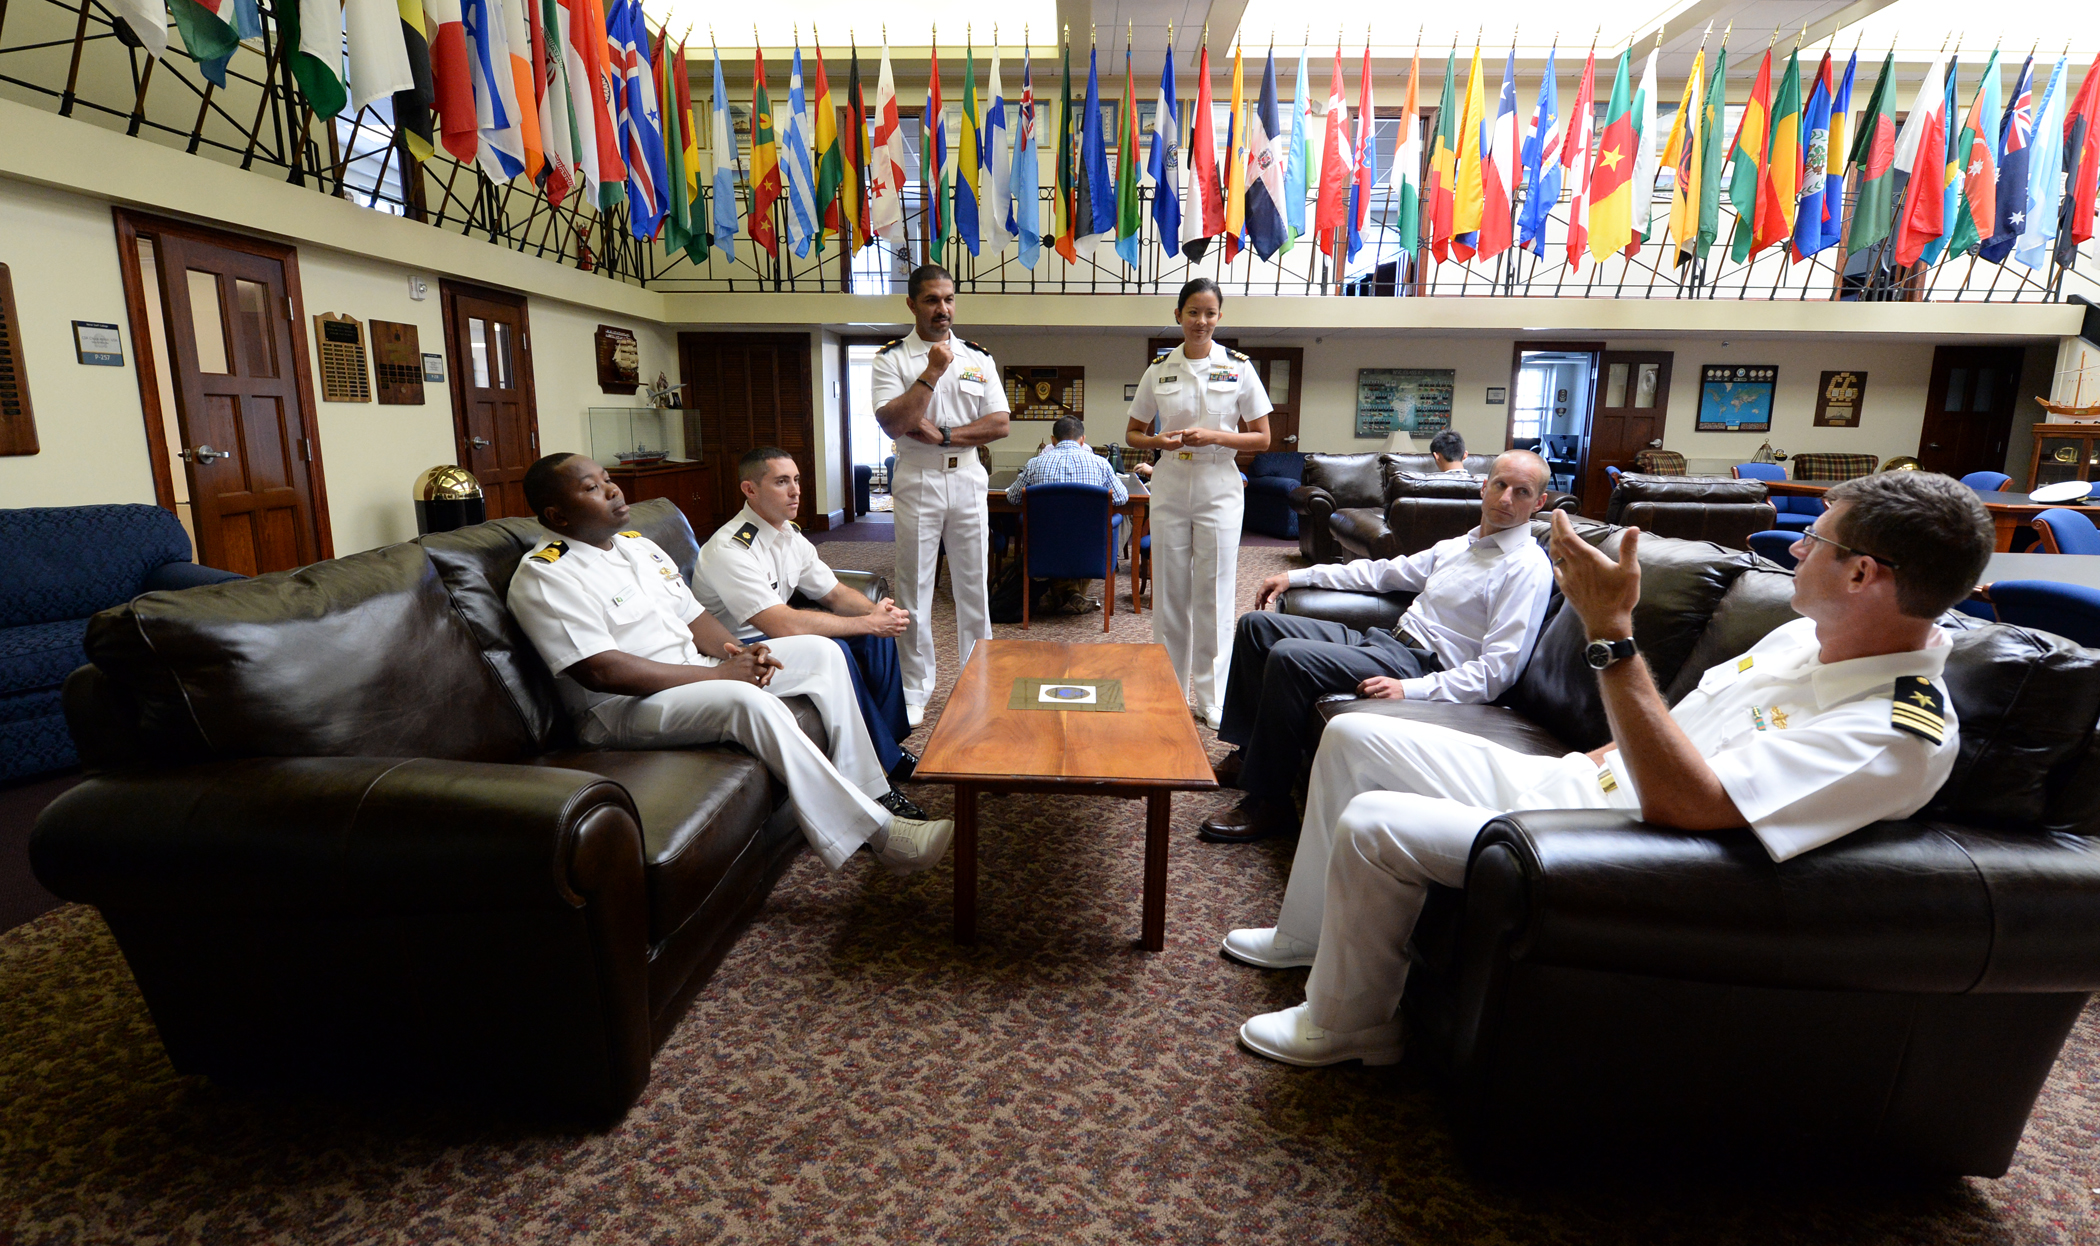 150826-N-PX557-134 NEWPORT, R.I. (Aug. 26, 2015) Nigerian navy Lt. Cmdr. Andy Zidon, Army Maj. Geoff Shorr, Kuwaiti navy Cmdr. Mohammad Alarefi, Lt. Cmdr. Katharine Cerezo, Air Force Maj. Joe Hanscom and Lt. Cmdr. Ted Huebner engage in conversation while attending U.S. Naval War College in Newport, Rhode Island as Naval Staff College students. Naval Staff College is a resident international program for intermediate-level officers who are integrated with their U.S. counterparts. Officers enrolled in international courses benefit from a robust field studies program that illustrates how the U.S. functions in all respects including; democratic ideals of elected government, internationally recognized human rights, free enterprise, judicial system, industry, diversity of society, press, political parties and interest groups, media and civil-military relations. (U.S. Navy photo by Chief Mass Communication Specialist James E. Foehl/Released)